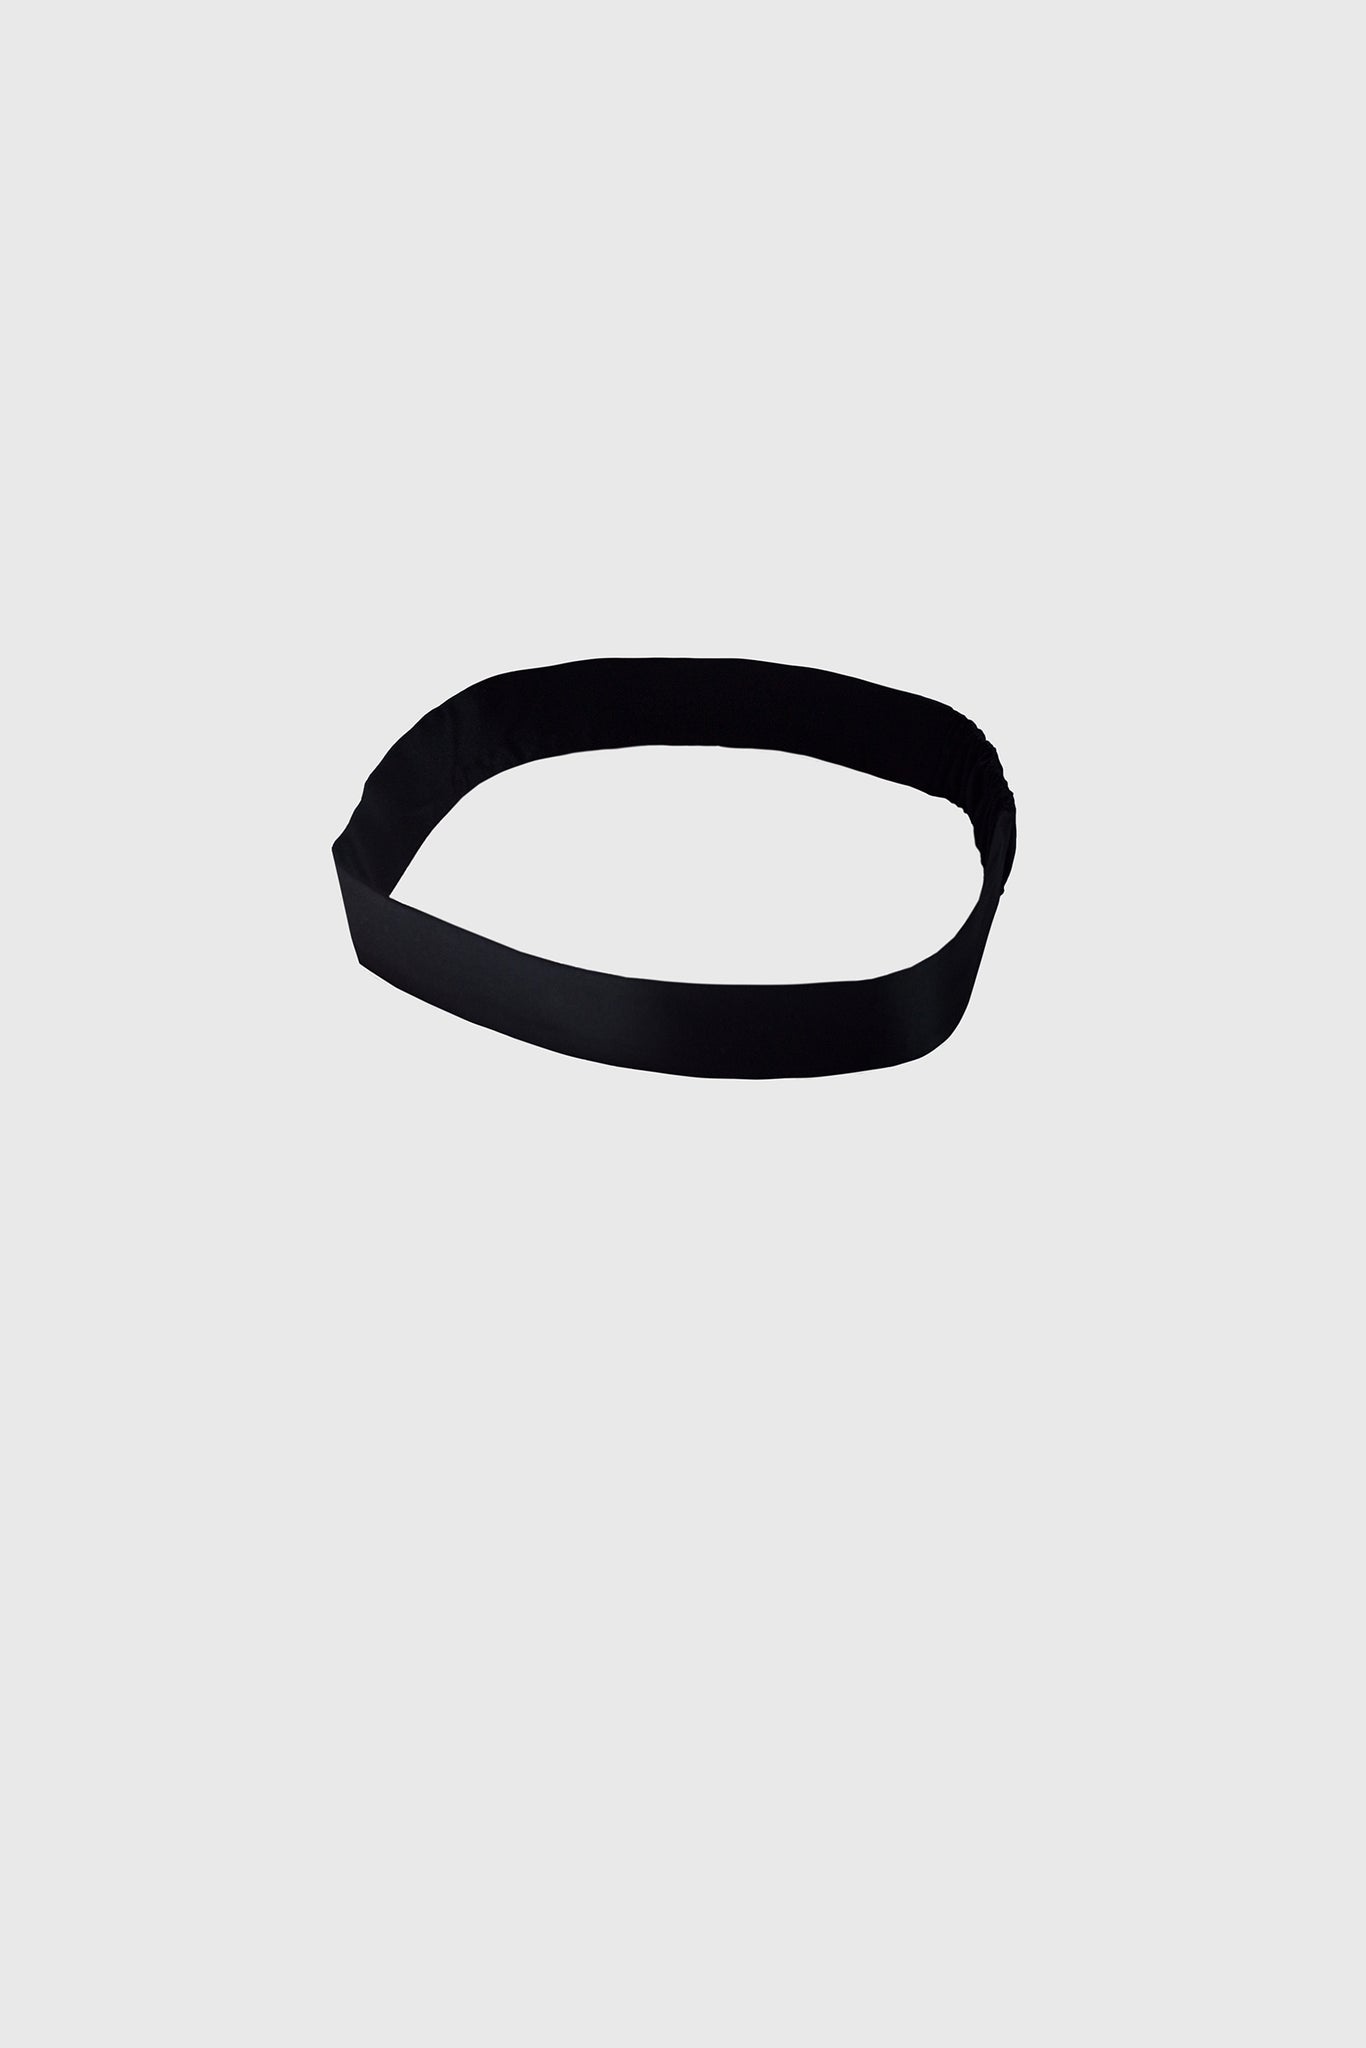 Ruxandra's women's and men's hair band, that doesn't thin your hair thickness, works with any outfit, soft shiny silk, black plain color, great to fix your hair 